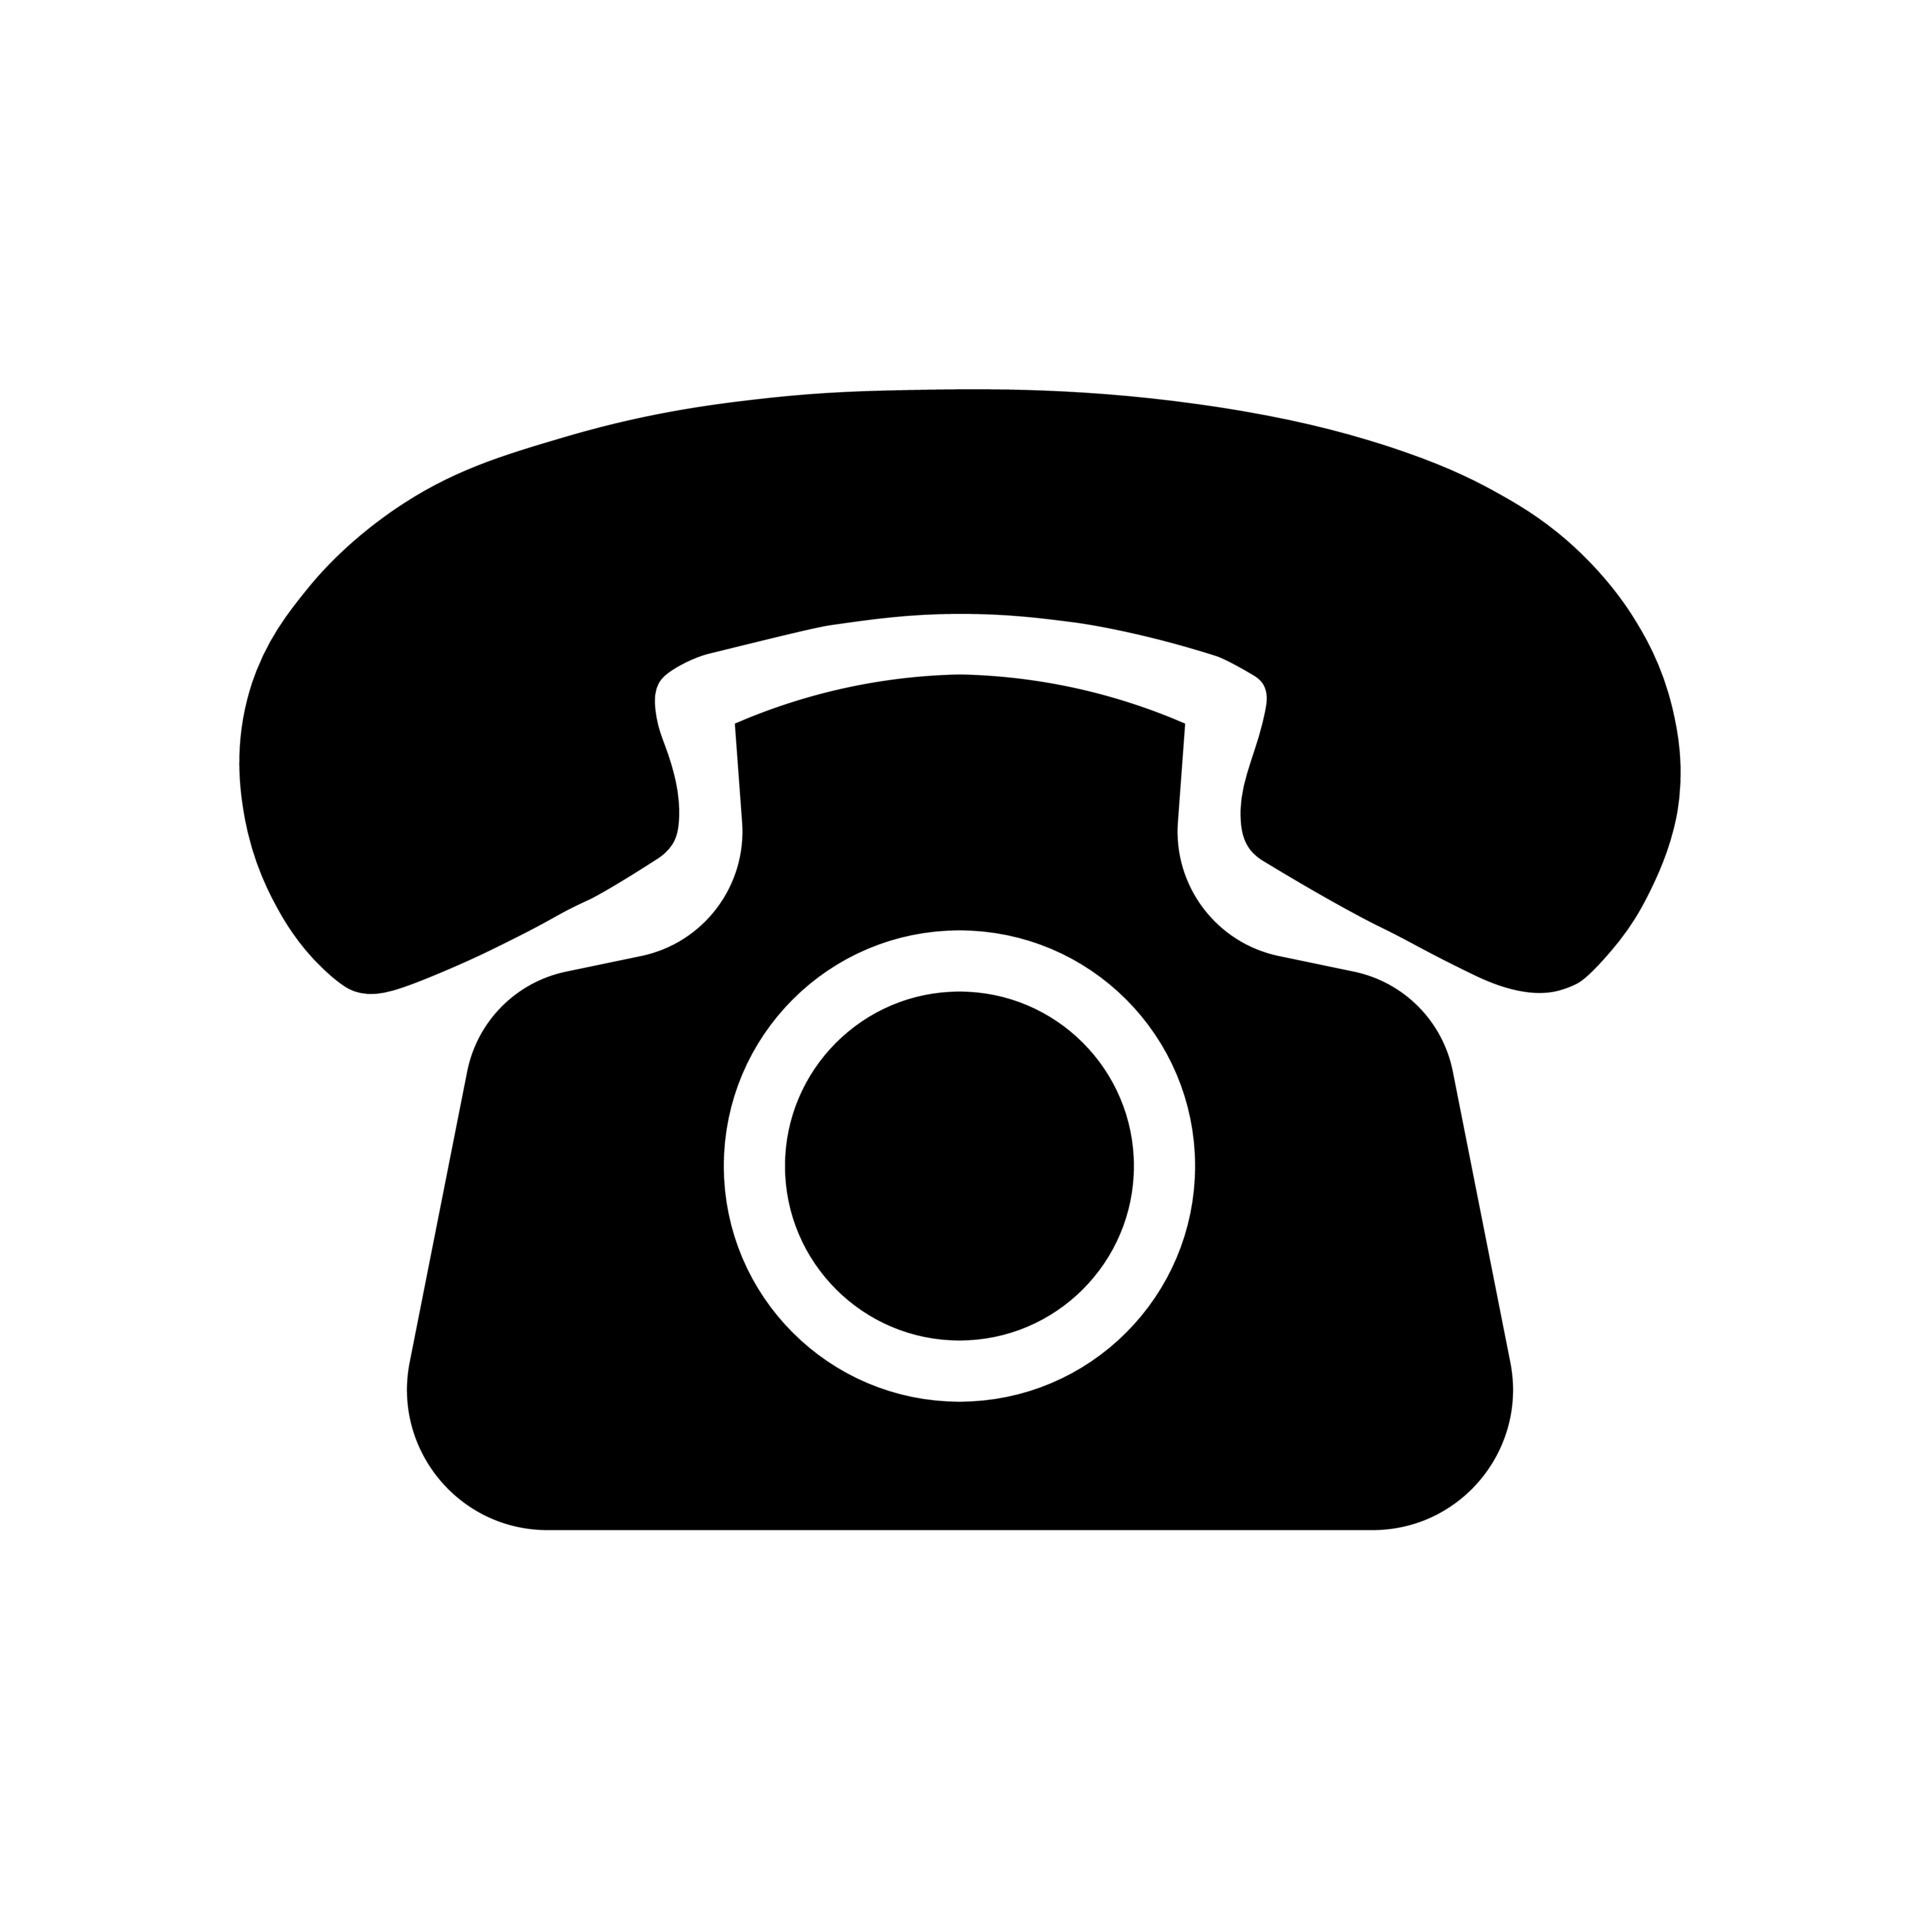 phone-icon-telephone-icon-symbol-for-app-and-messenger-free-vector.jpg